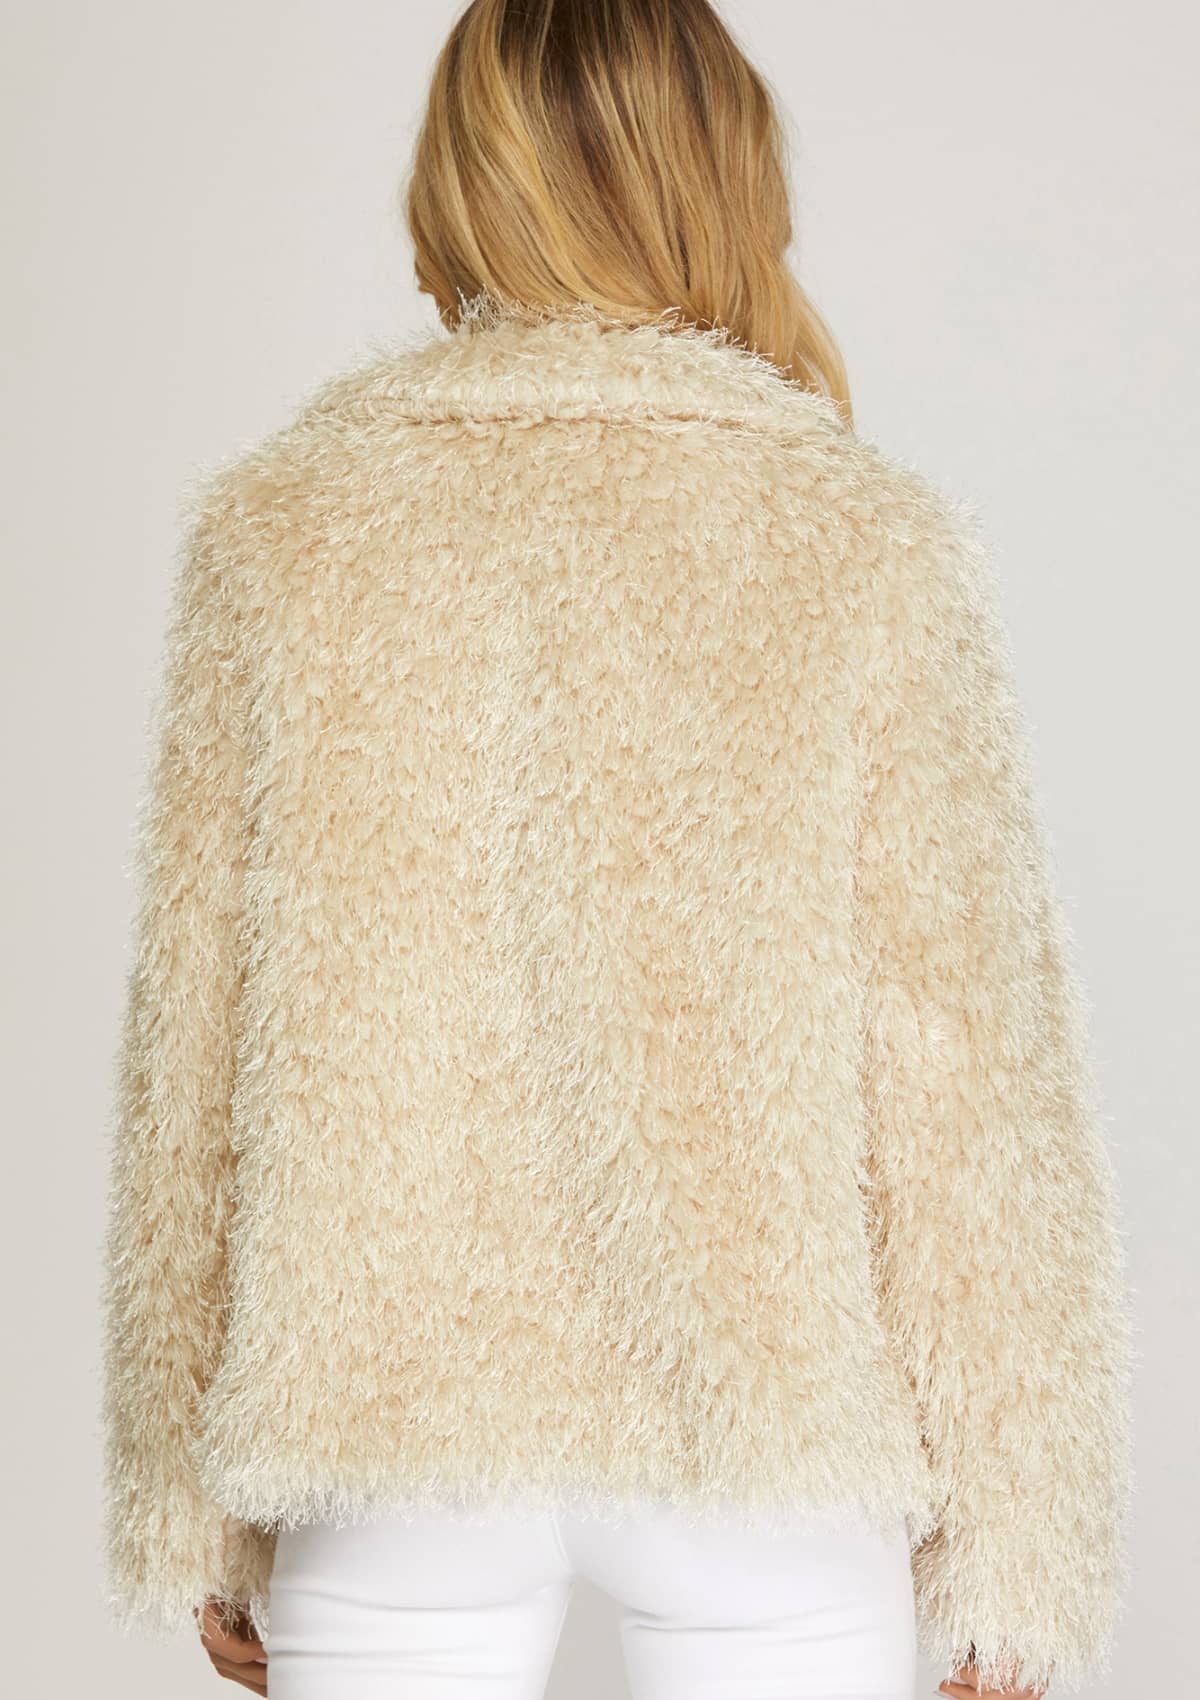 Long Sleeve Faux Fur Jacket With Pockets